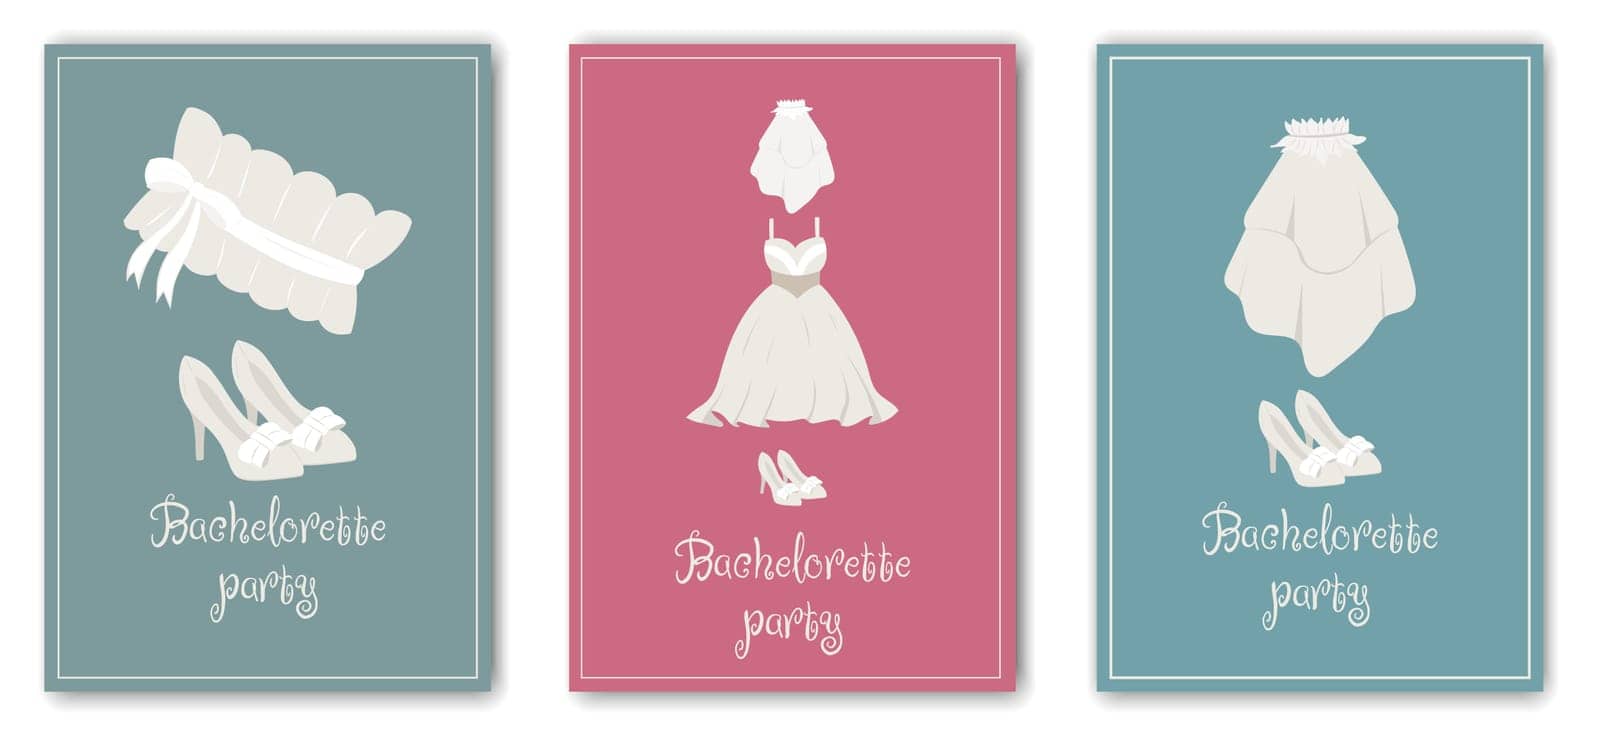 3 Set Bridal Shower invitation template With images of the wedding dress, veil, shoes and garter of the bride